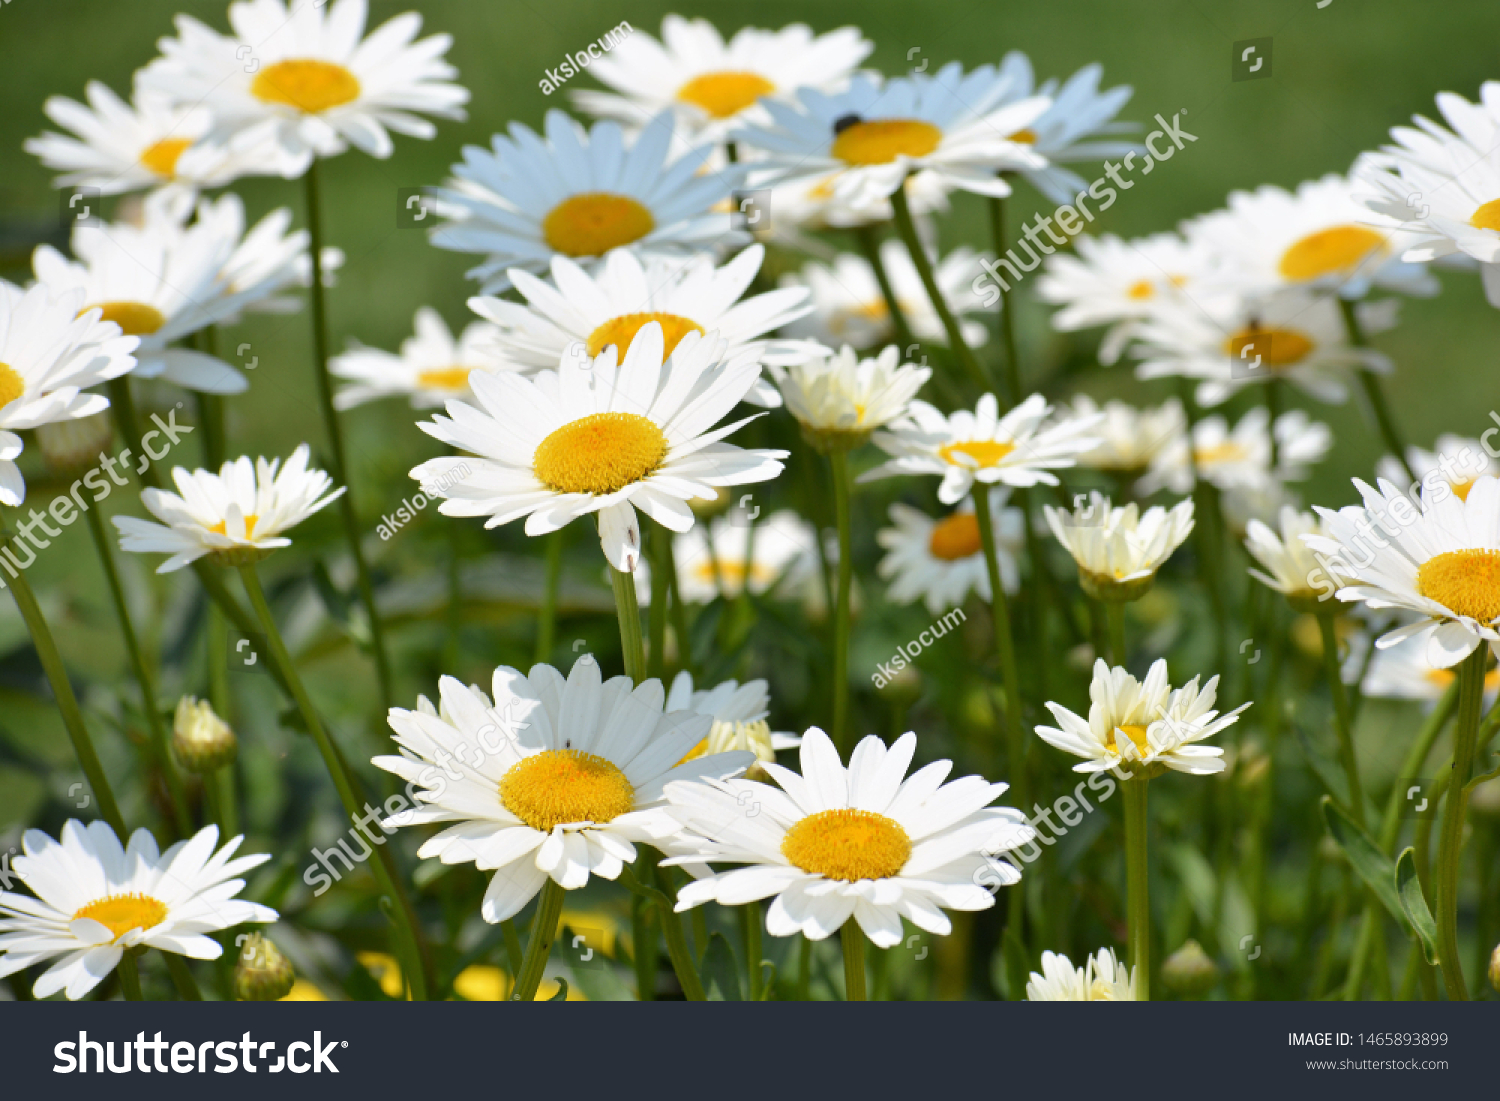 Leucanthemum vulgare, commonly known as the ox-eye daisy, oxeye daisy, dog daisy and other common names, is a widespread flowering plant #1465893899